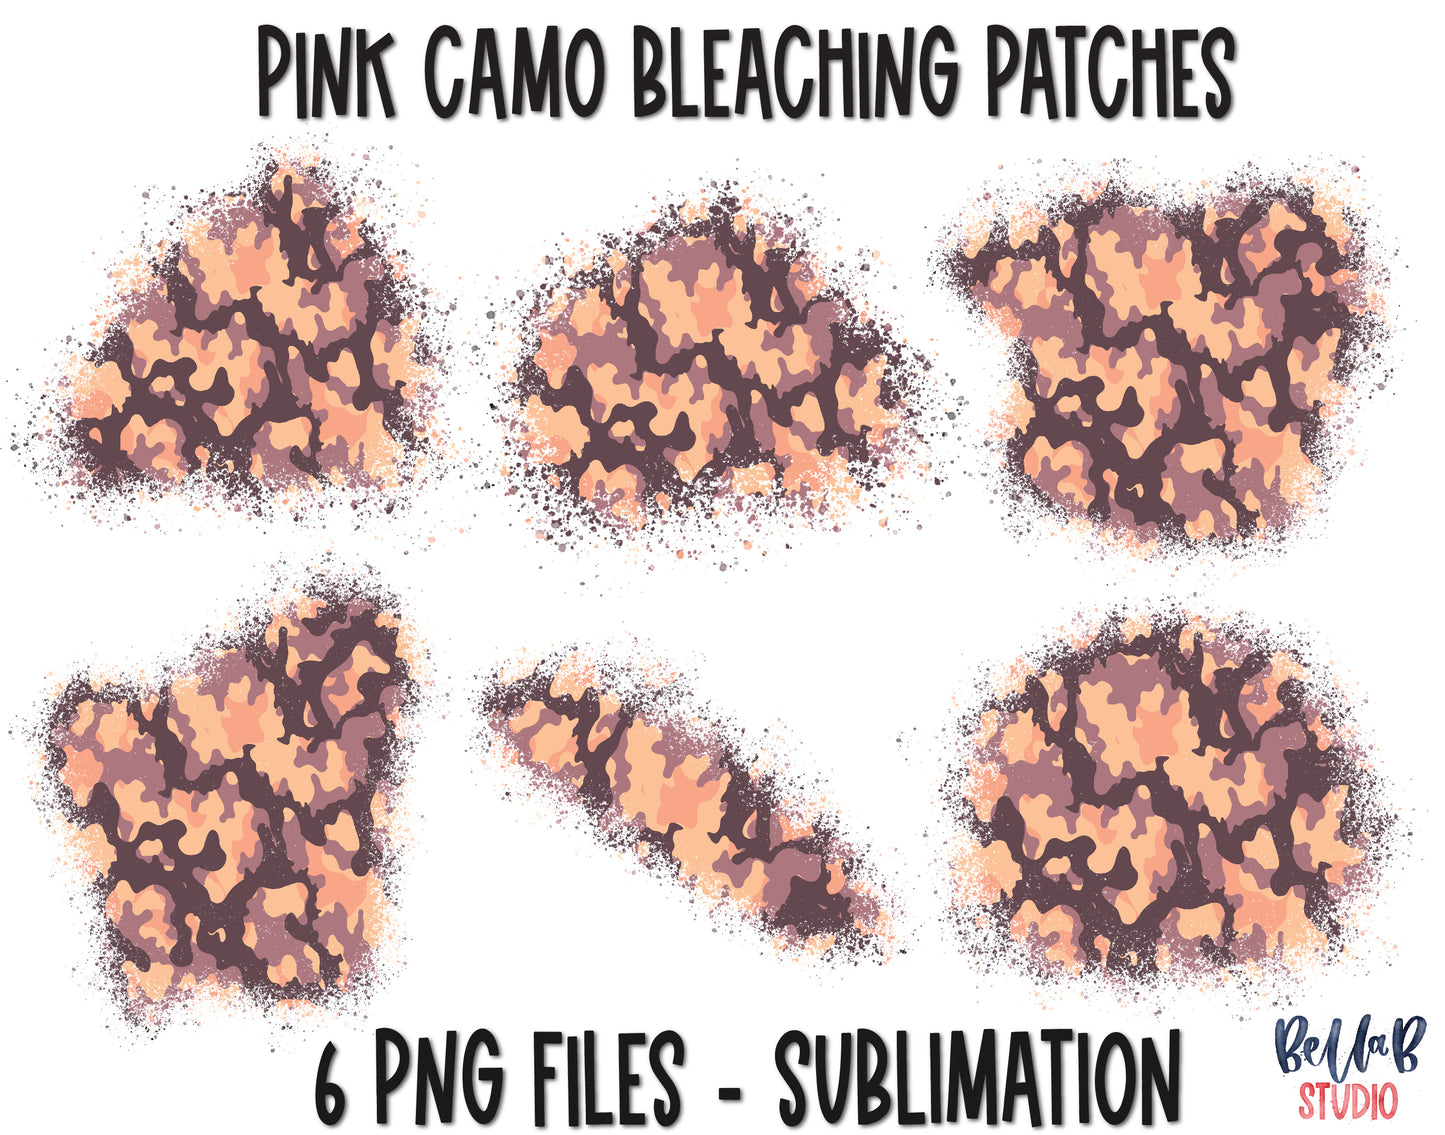 Pink Camo Sublimation Patches - T Shirt Bleaching Patches